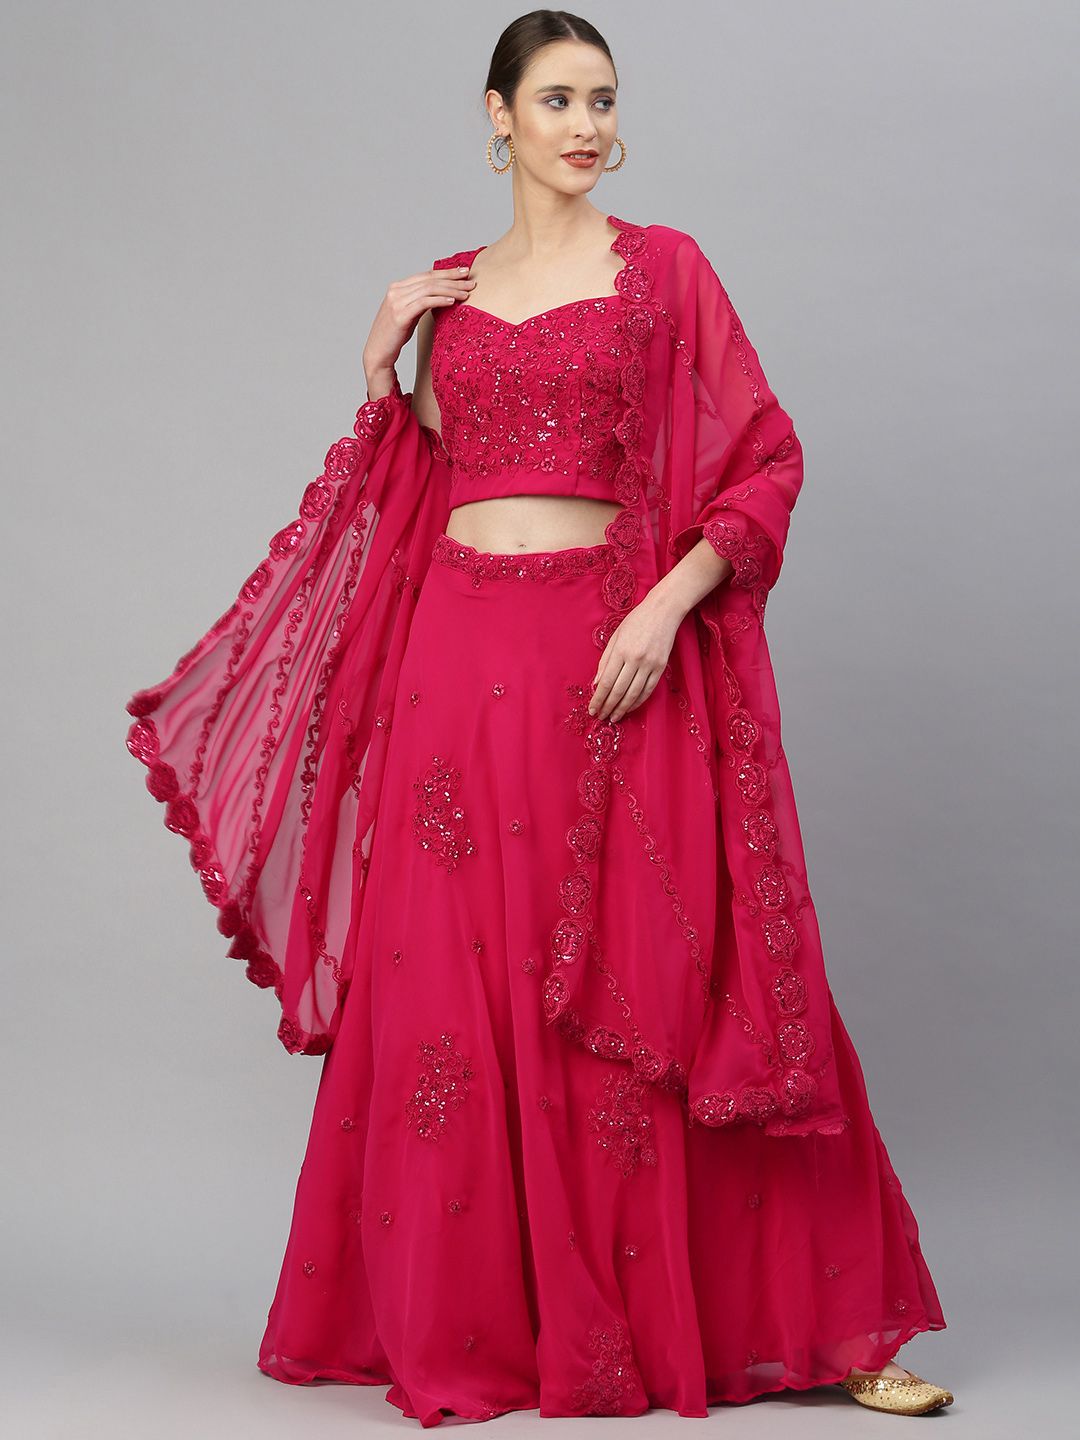 Readiprint Fashions Pink Embroidered Sequinned Semi-Stitched Lehenga & Unstitched Blouse With Dupatta Price in India